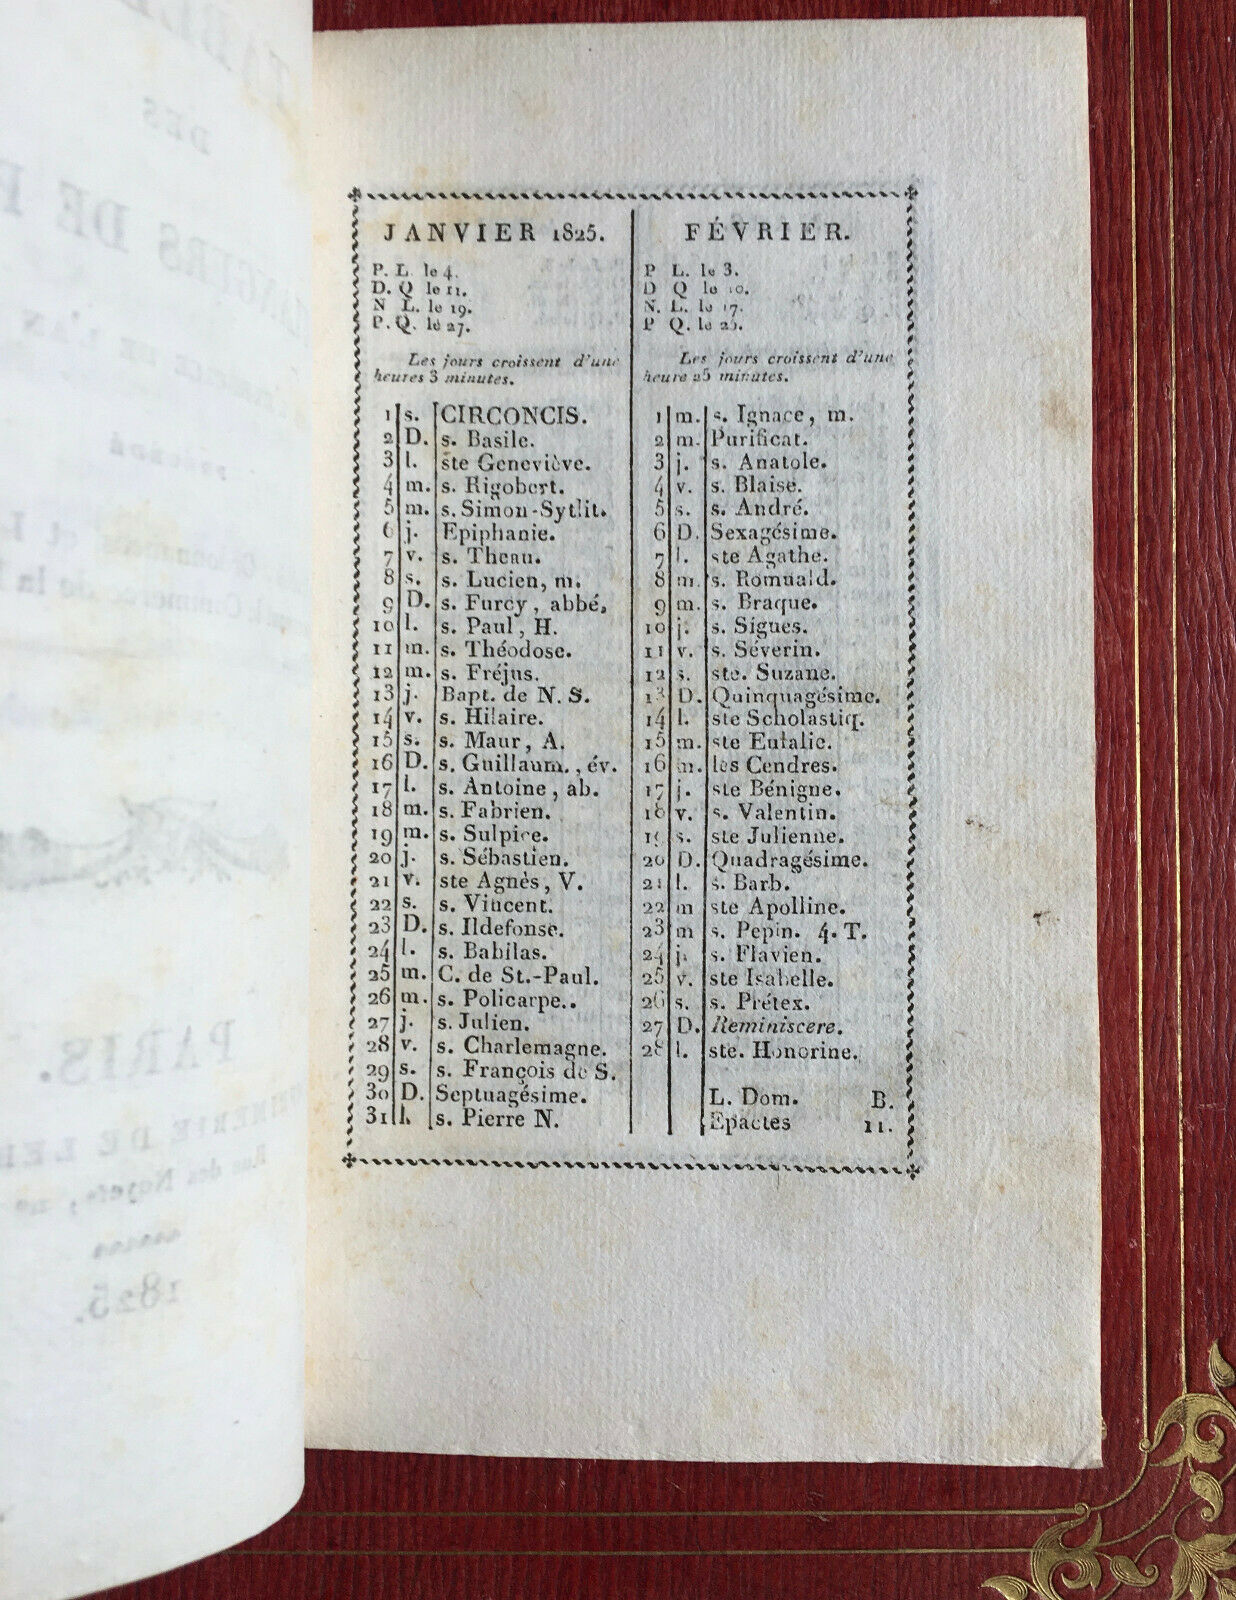 TABLE OF PARIS BAKERS, FOR THE YEAR 1825 - LEBÈGUE - 1825.